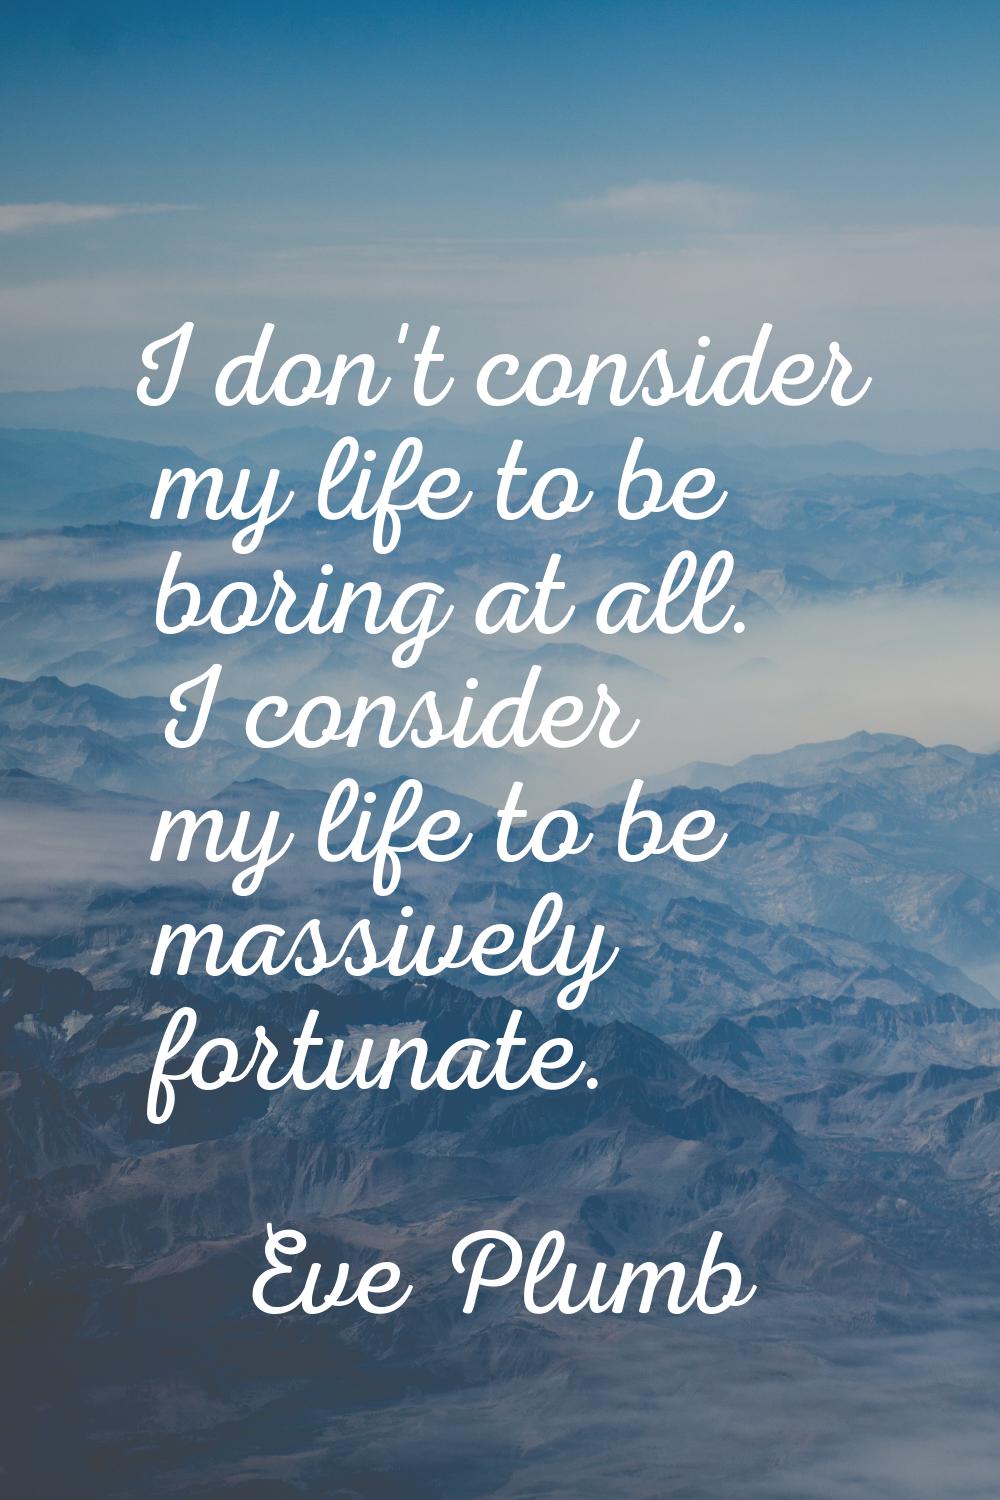 I don't consider my life to be boring at all. I consider my life to be massively fortunate.